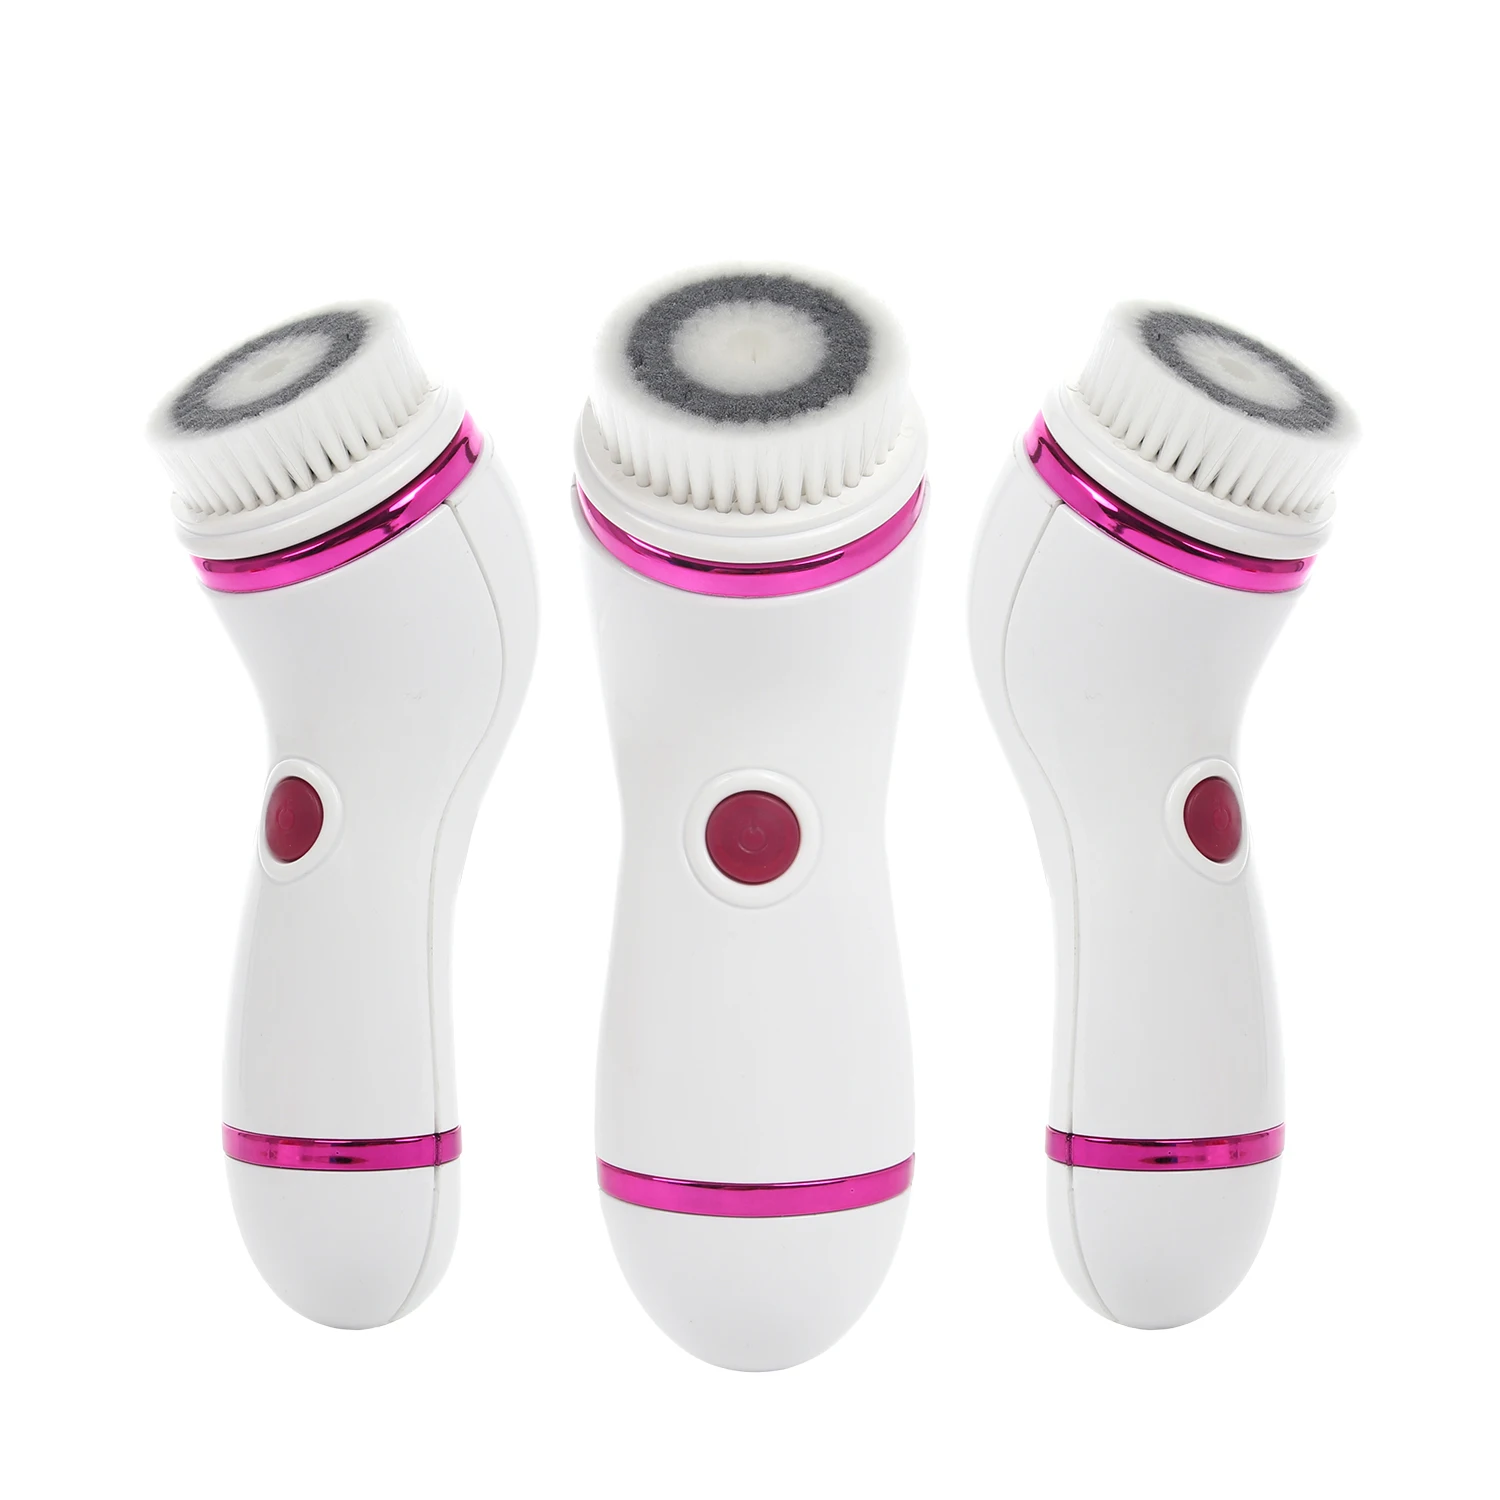 CNAIER AE-8286 4 in 1 Multifunction Electric Waterproof Beauty Care Rotating Instrument Facial Massager Face Brush Cleansing